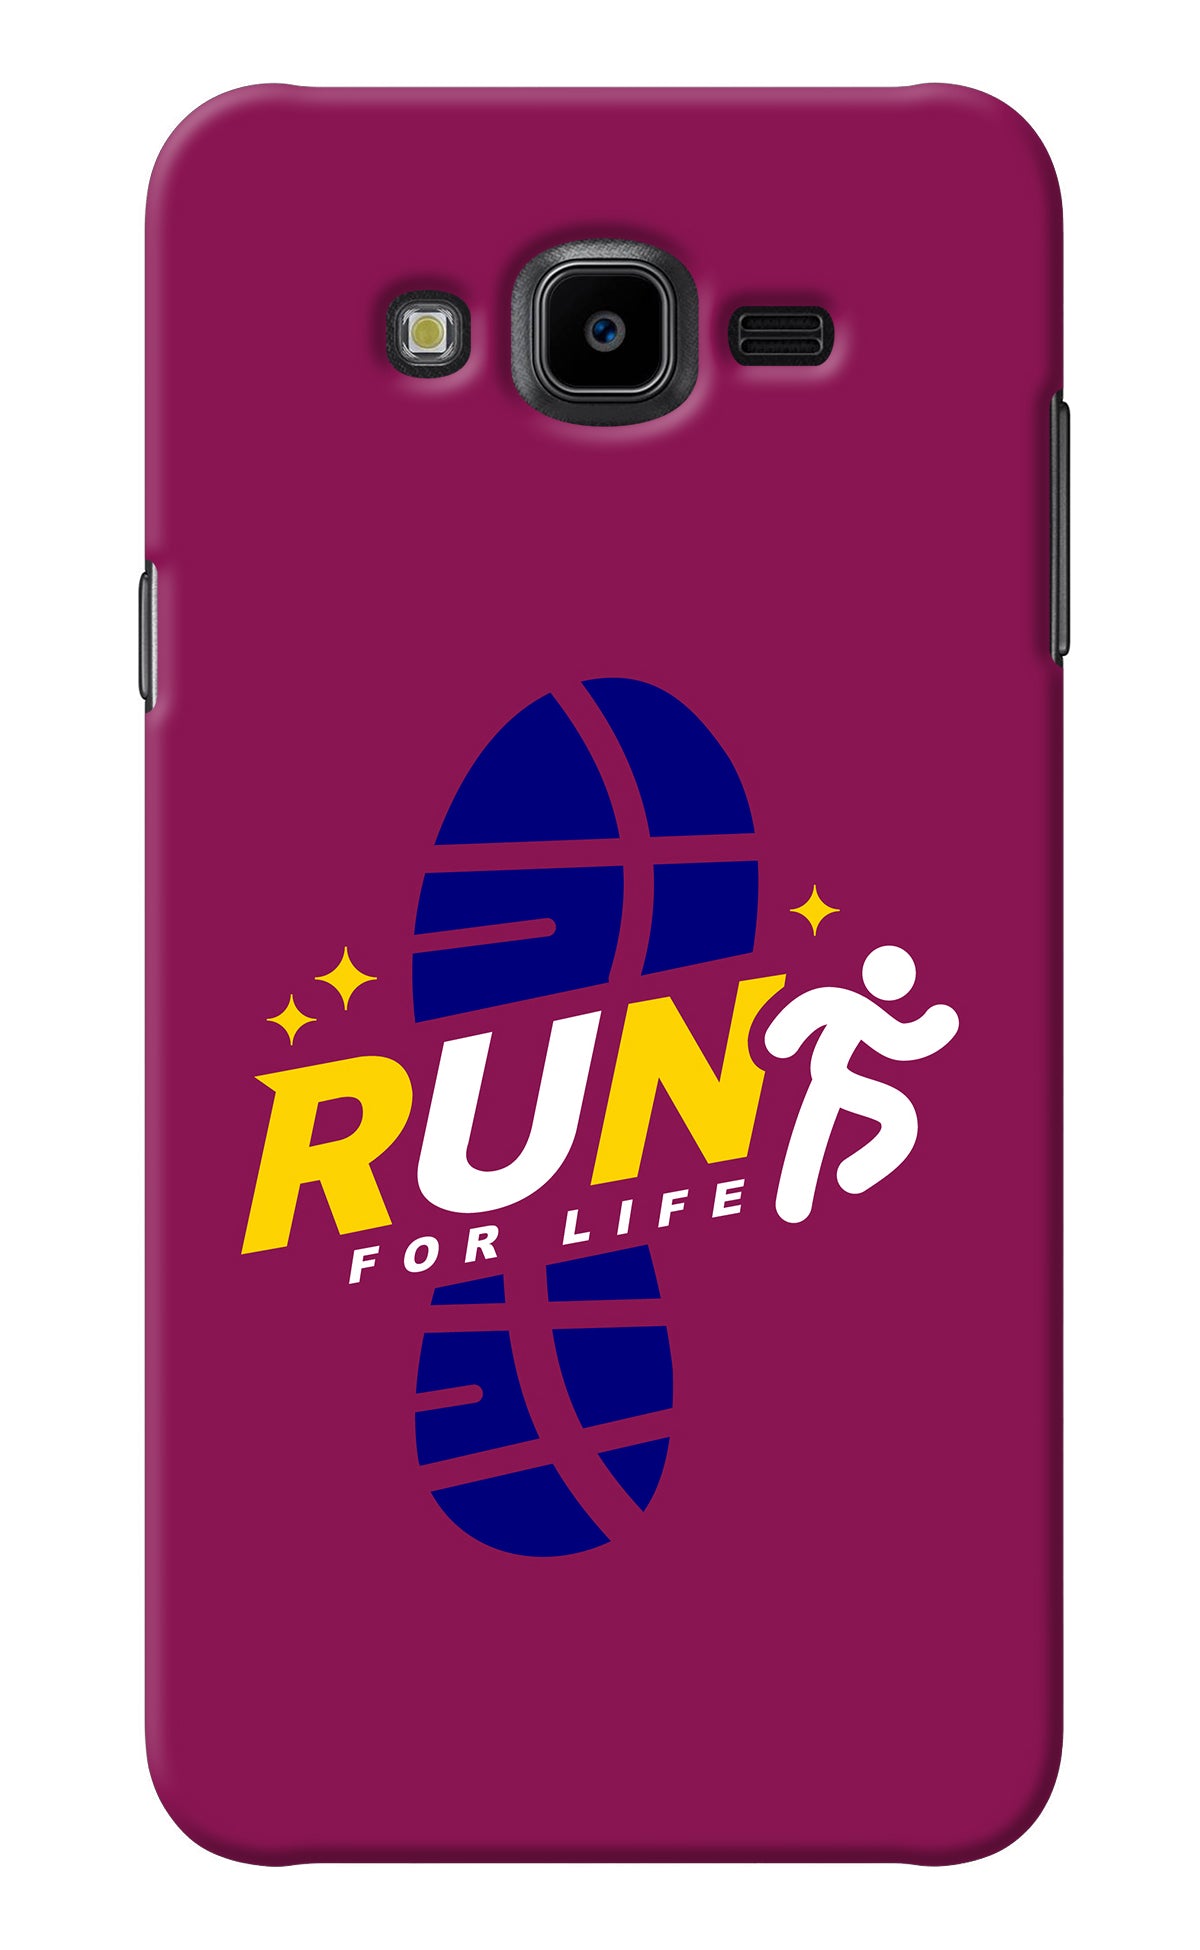 Run for Life Samsung J7 Nxt Back Cover